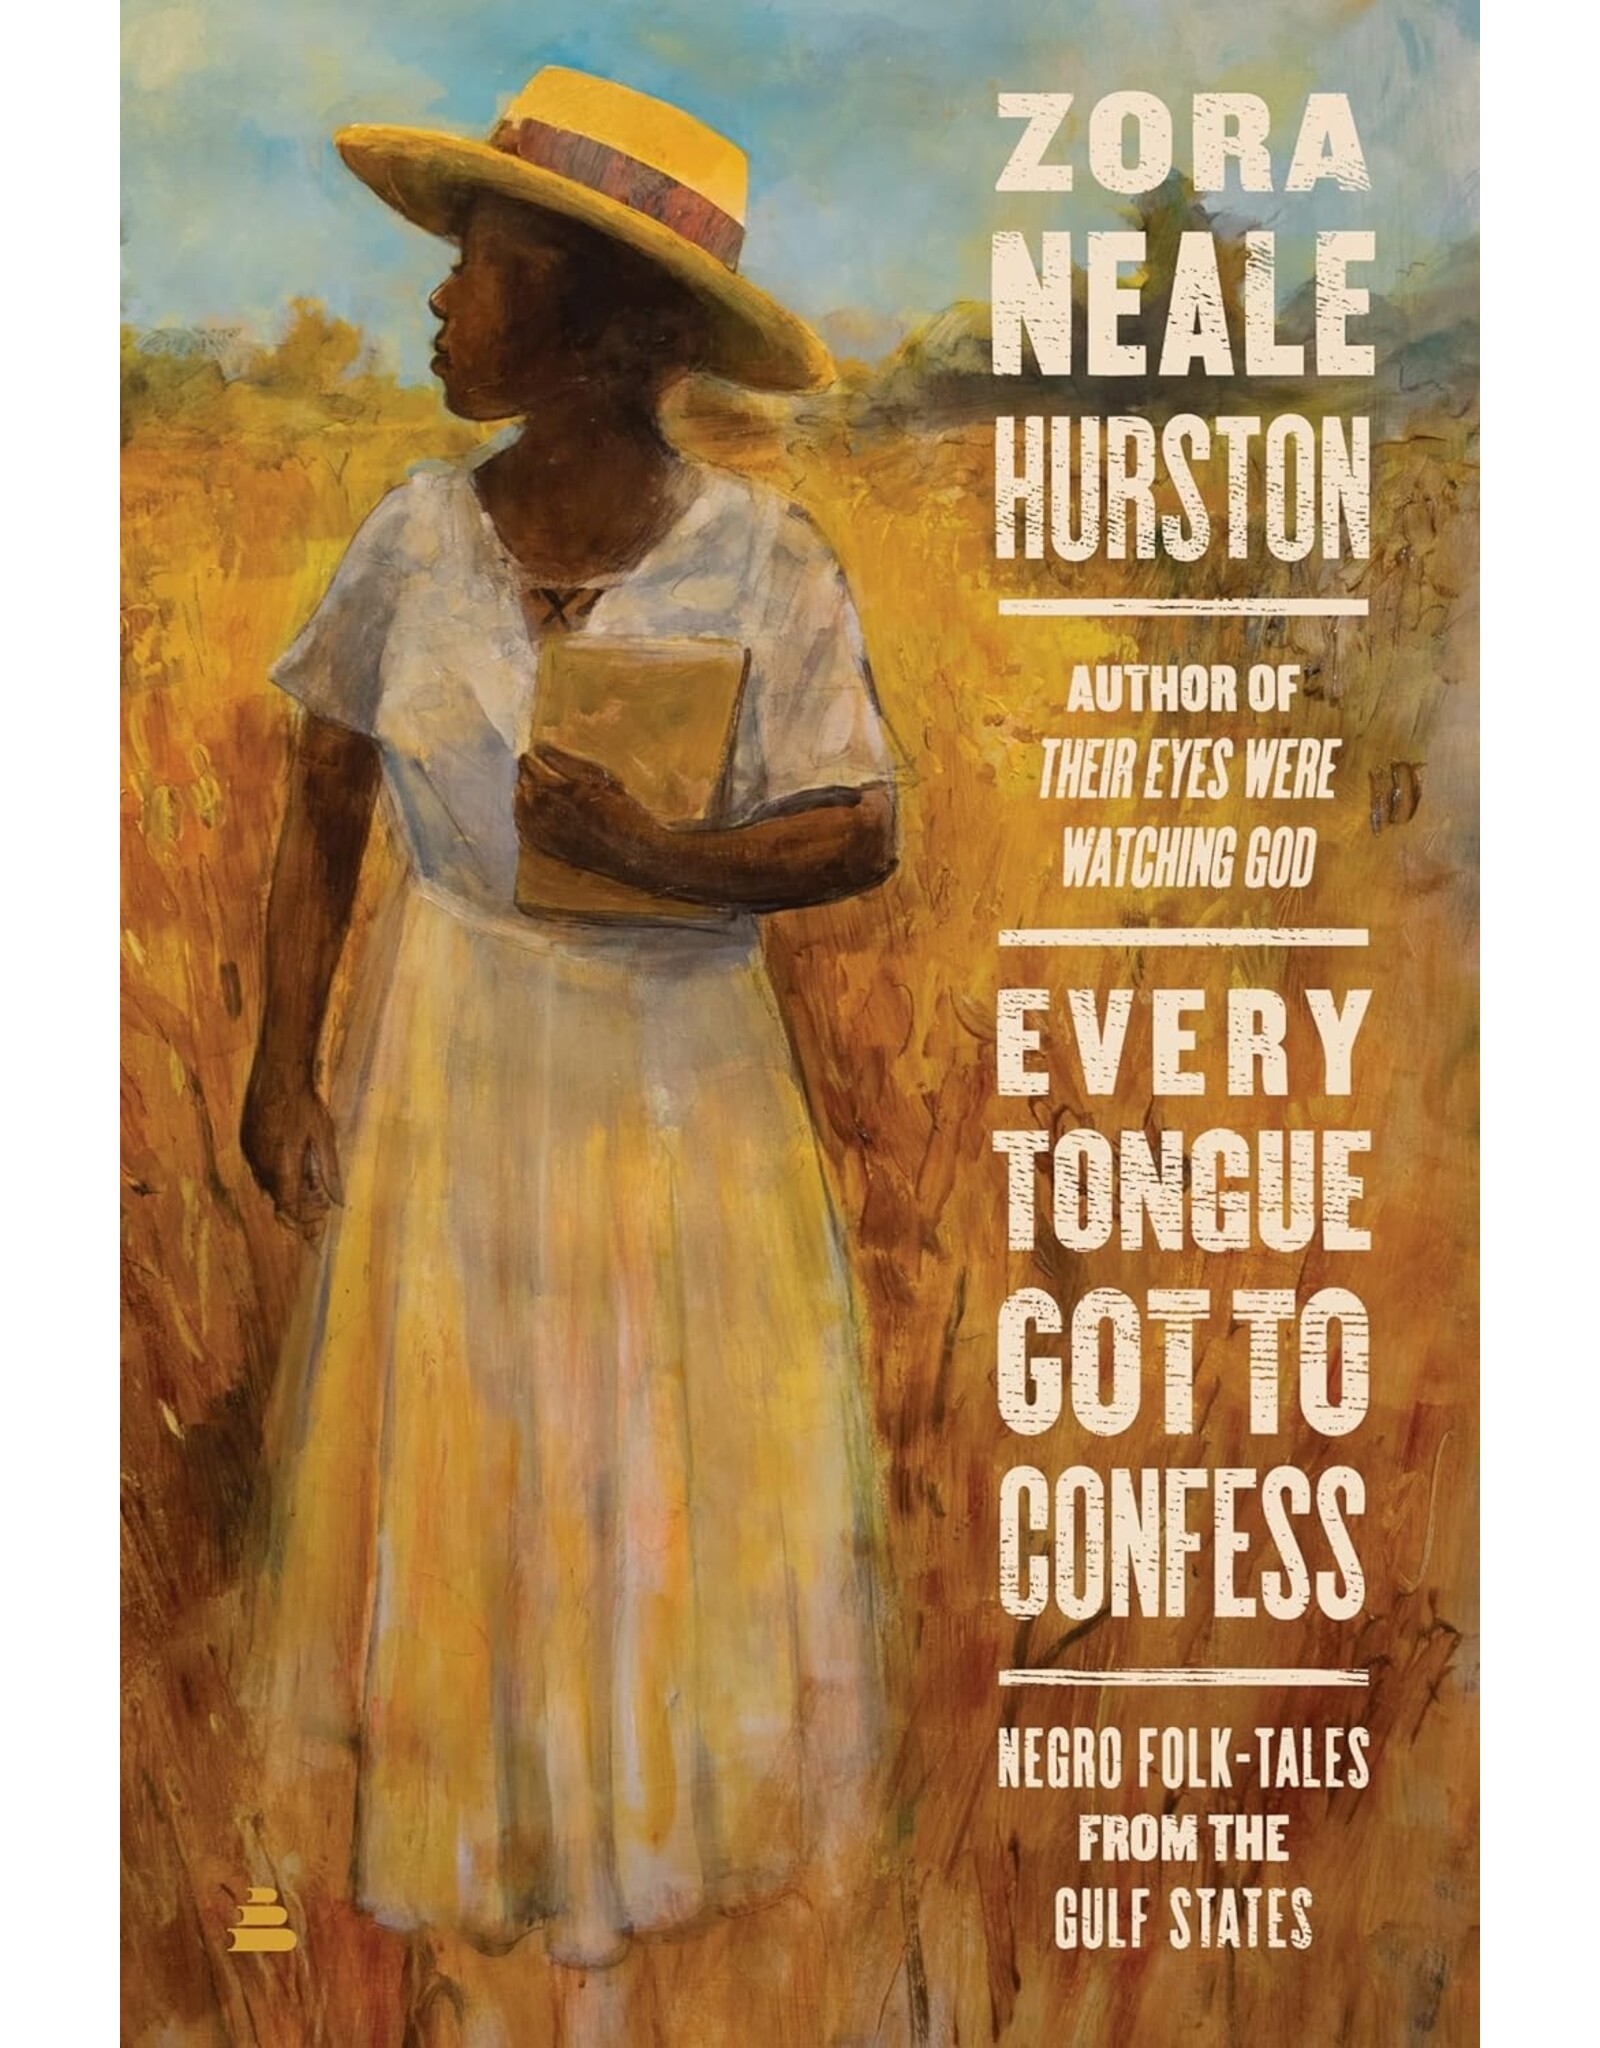 Louisiana History & Culture Every Tongue Got To Confess: Negro Folk Tales From the Gulf States